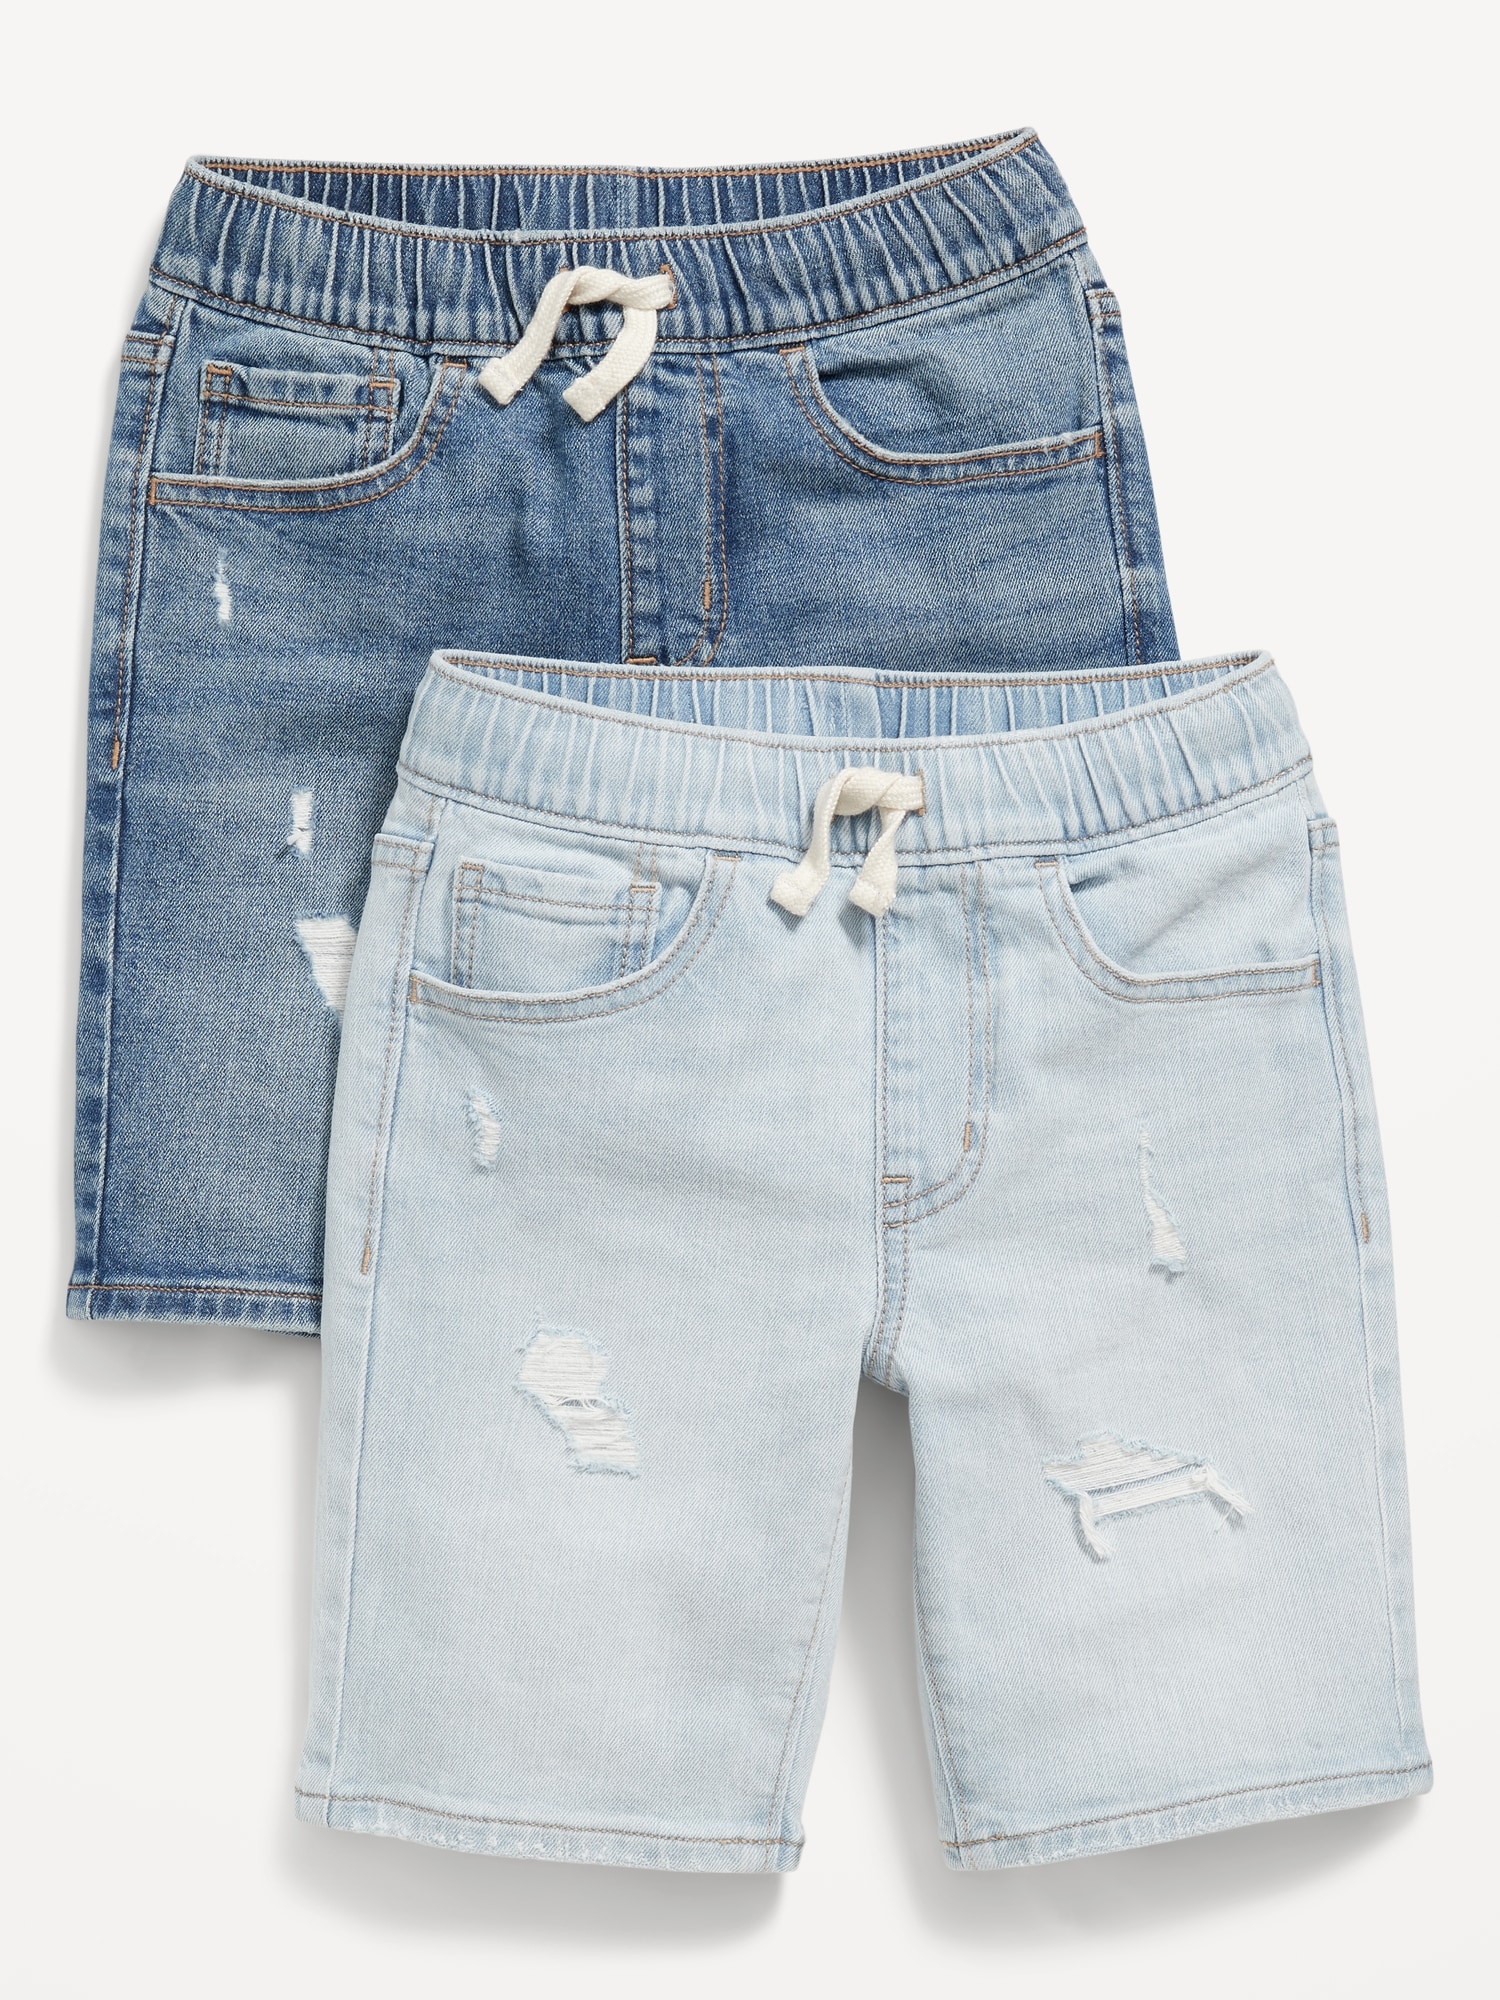 360° Stretch Pull-On Jean Shorts 2-Pack for Boys (At Knee) Hot Deal